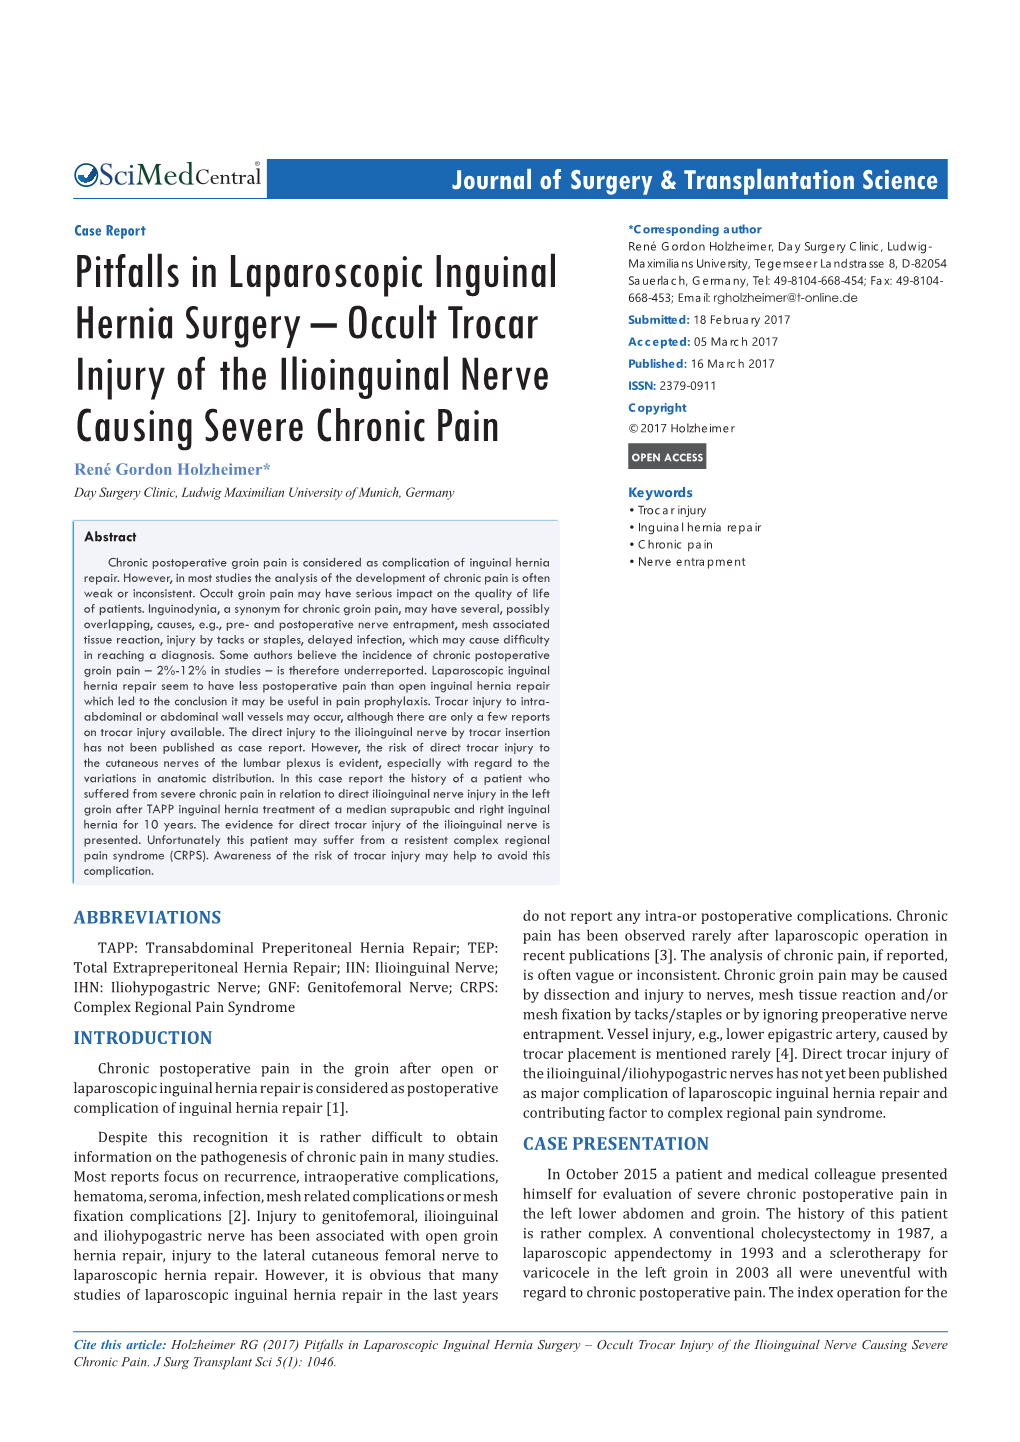 Pitfalls in Laparoscopic Inguinal Hernia Surgery – Occult Trocar Injury of the Ilioinguinal Nerve Causing Severe Chronic Pain